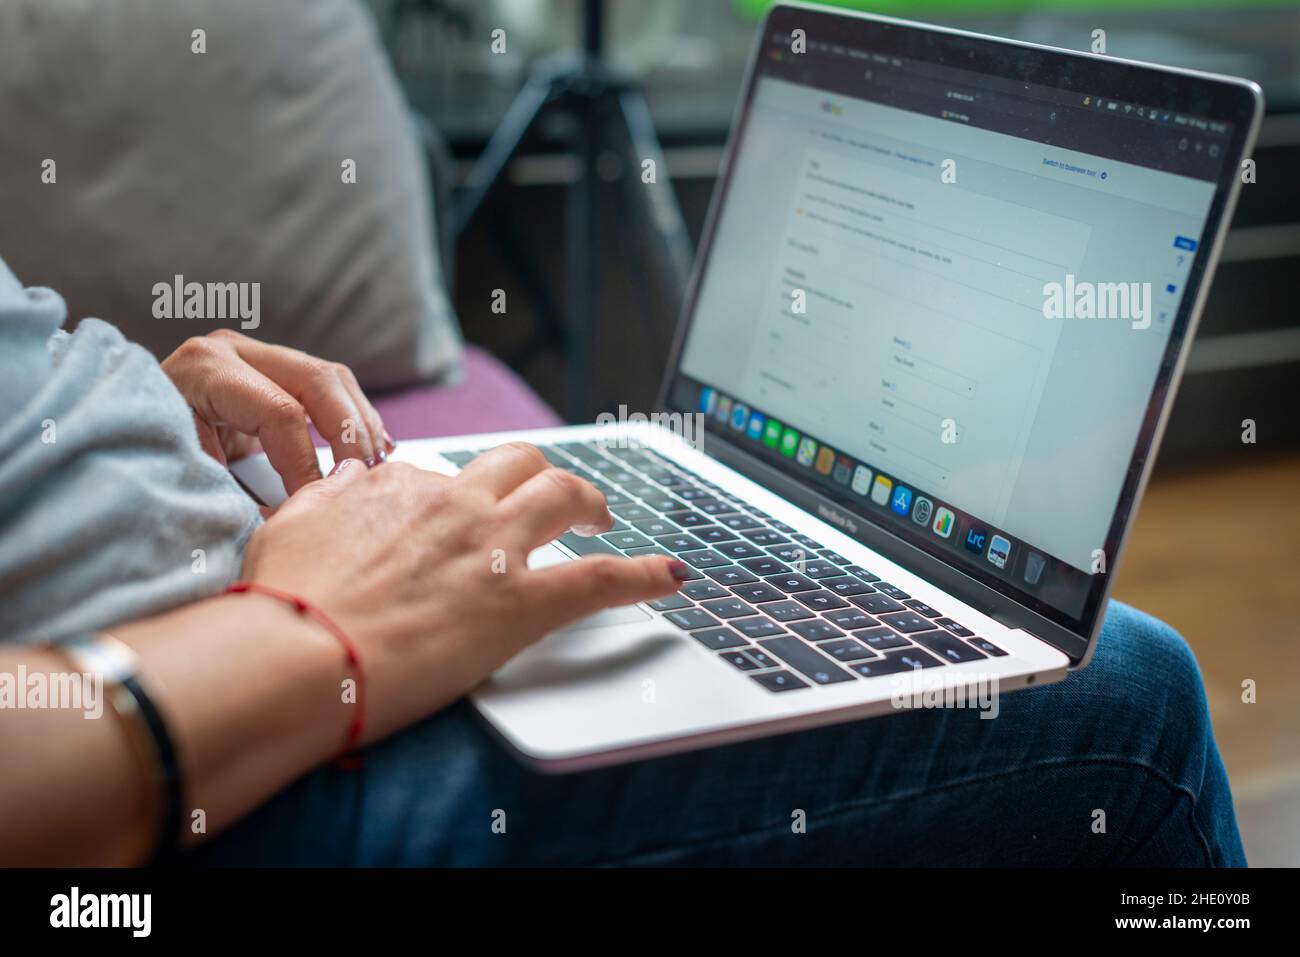 Woman works from home on laptop computer, London,UK Stock Photo